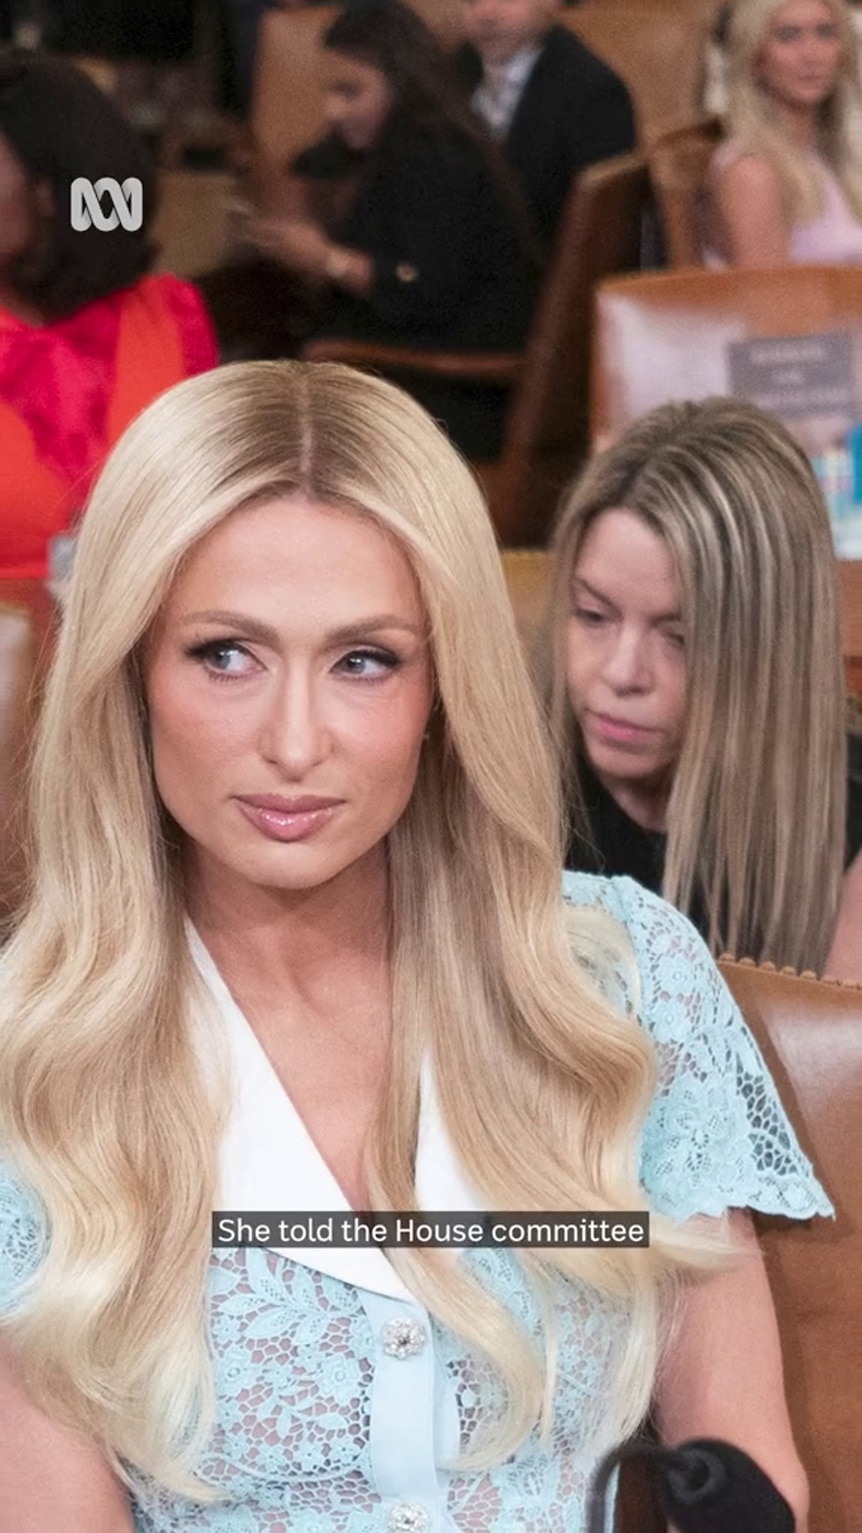 Paris Hilton looks off screen with with people sitting around tables in the background